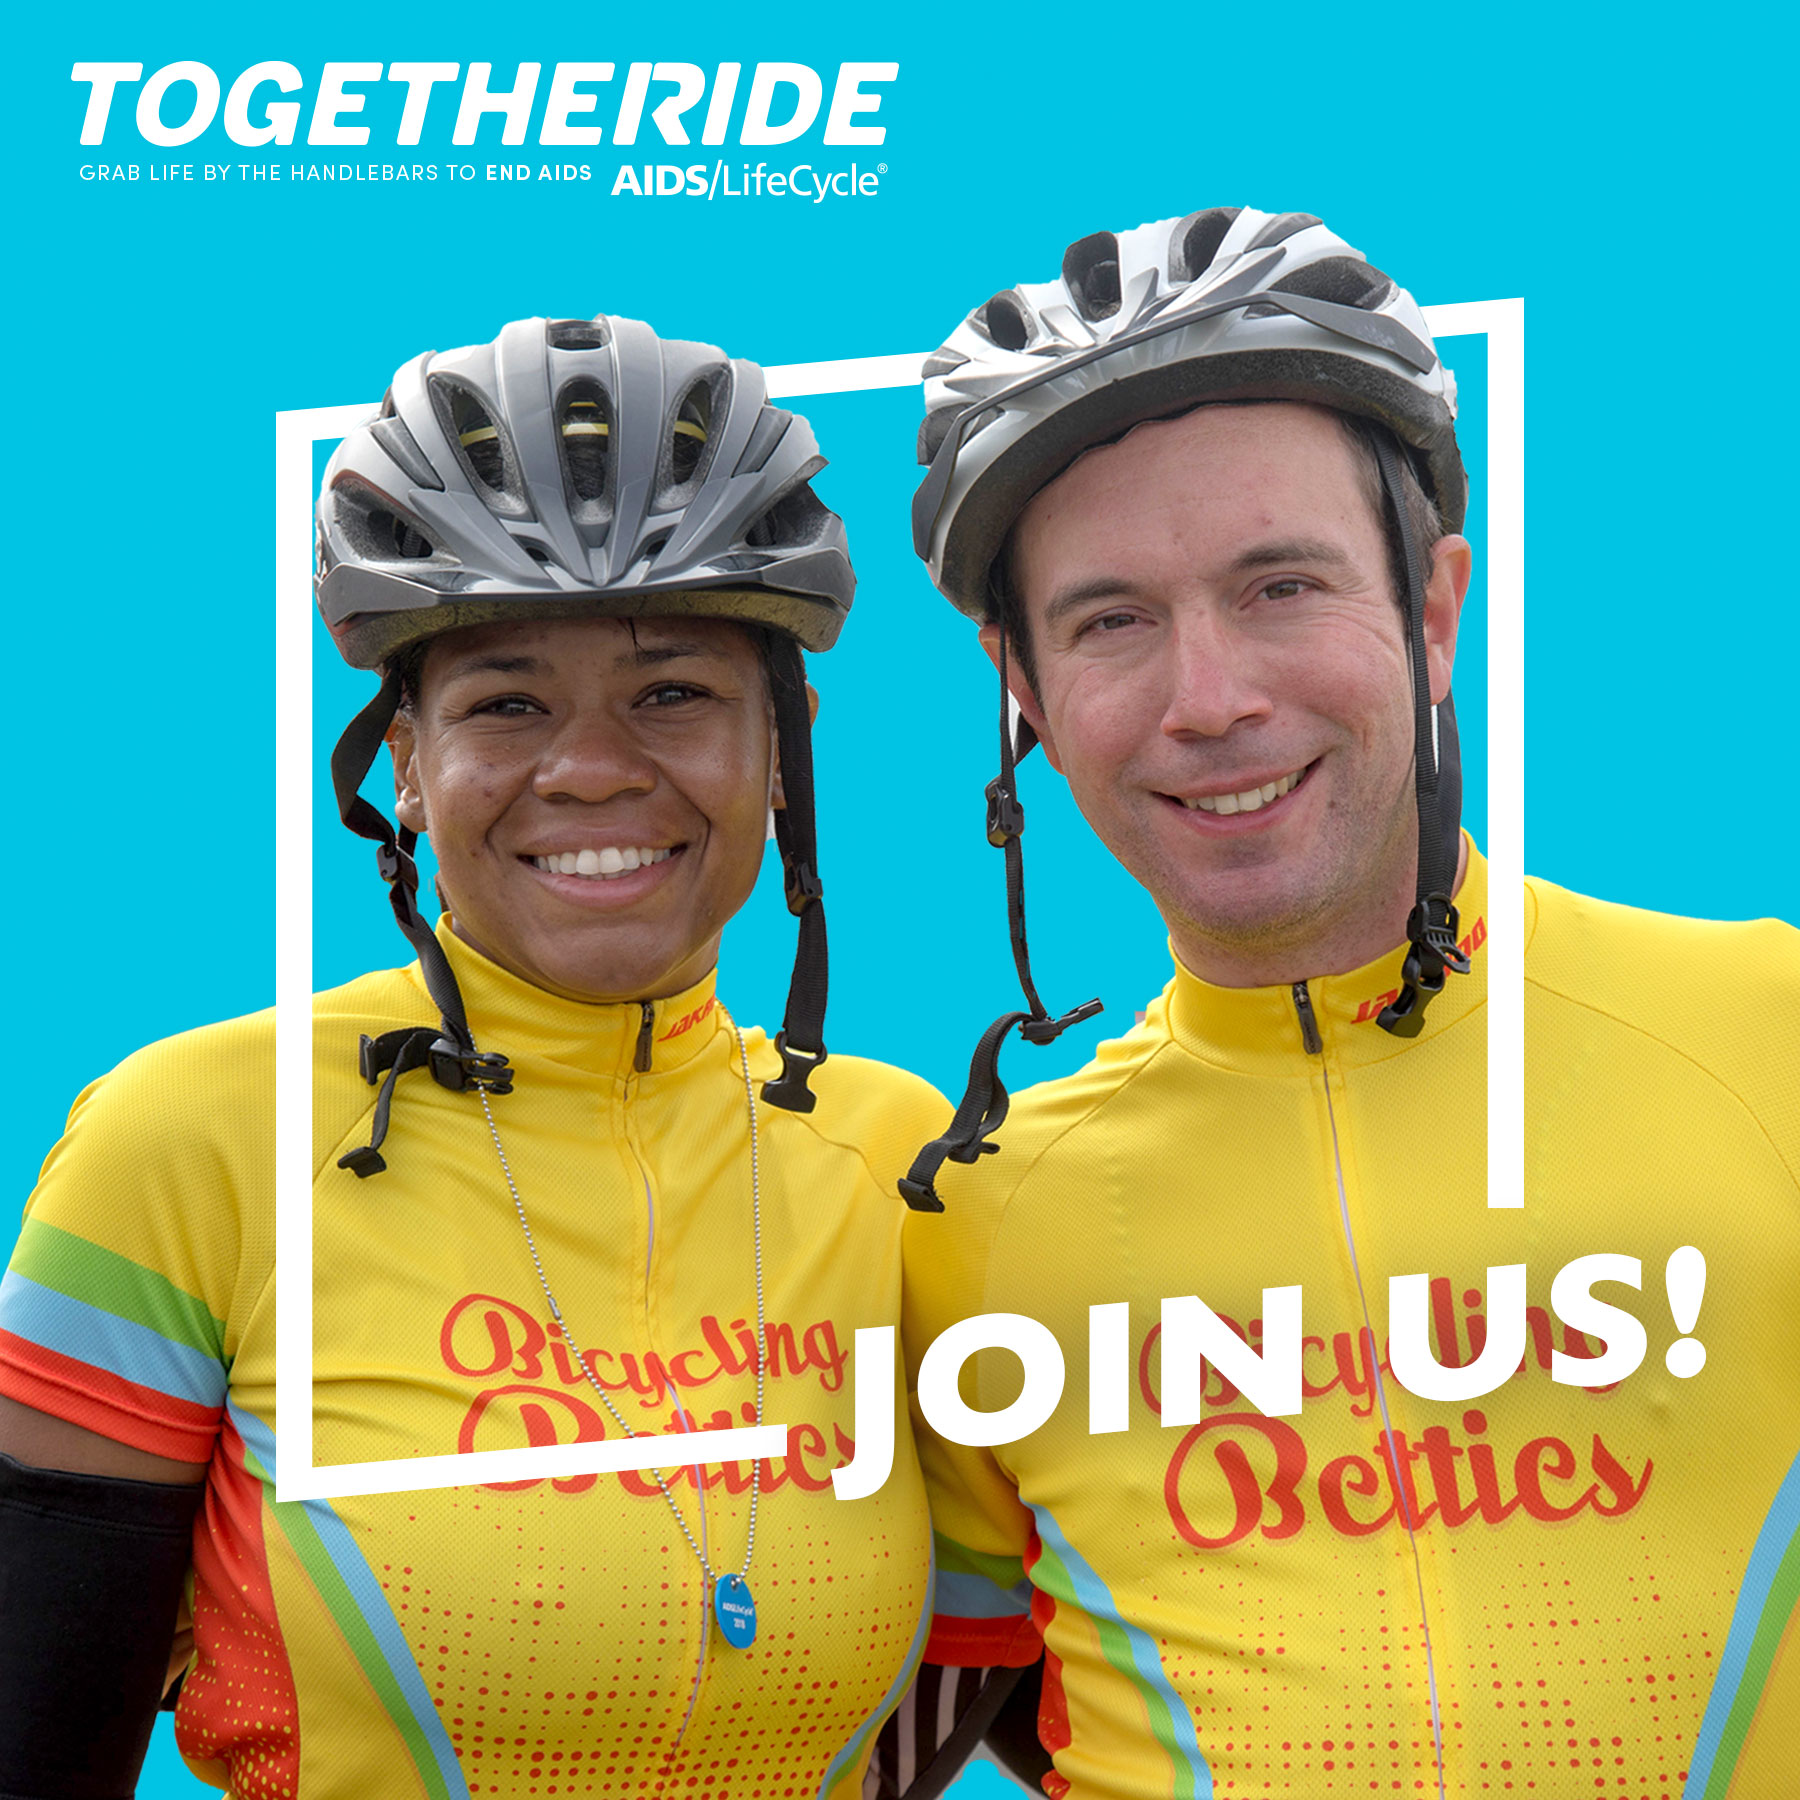 Togetheride Aids / Lifesycle